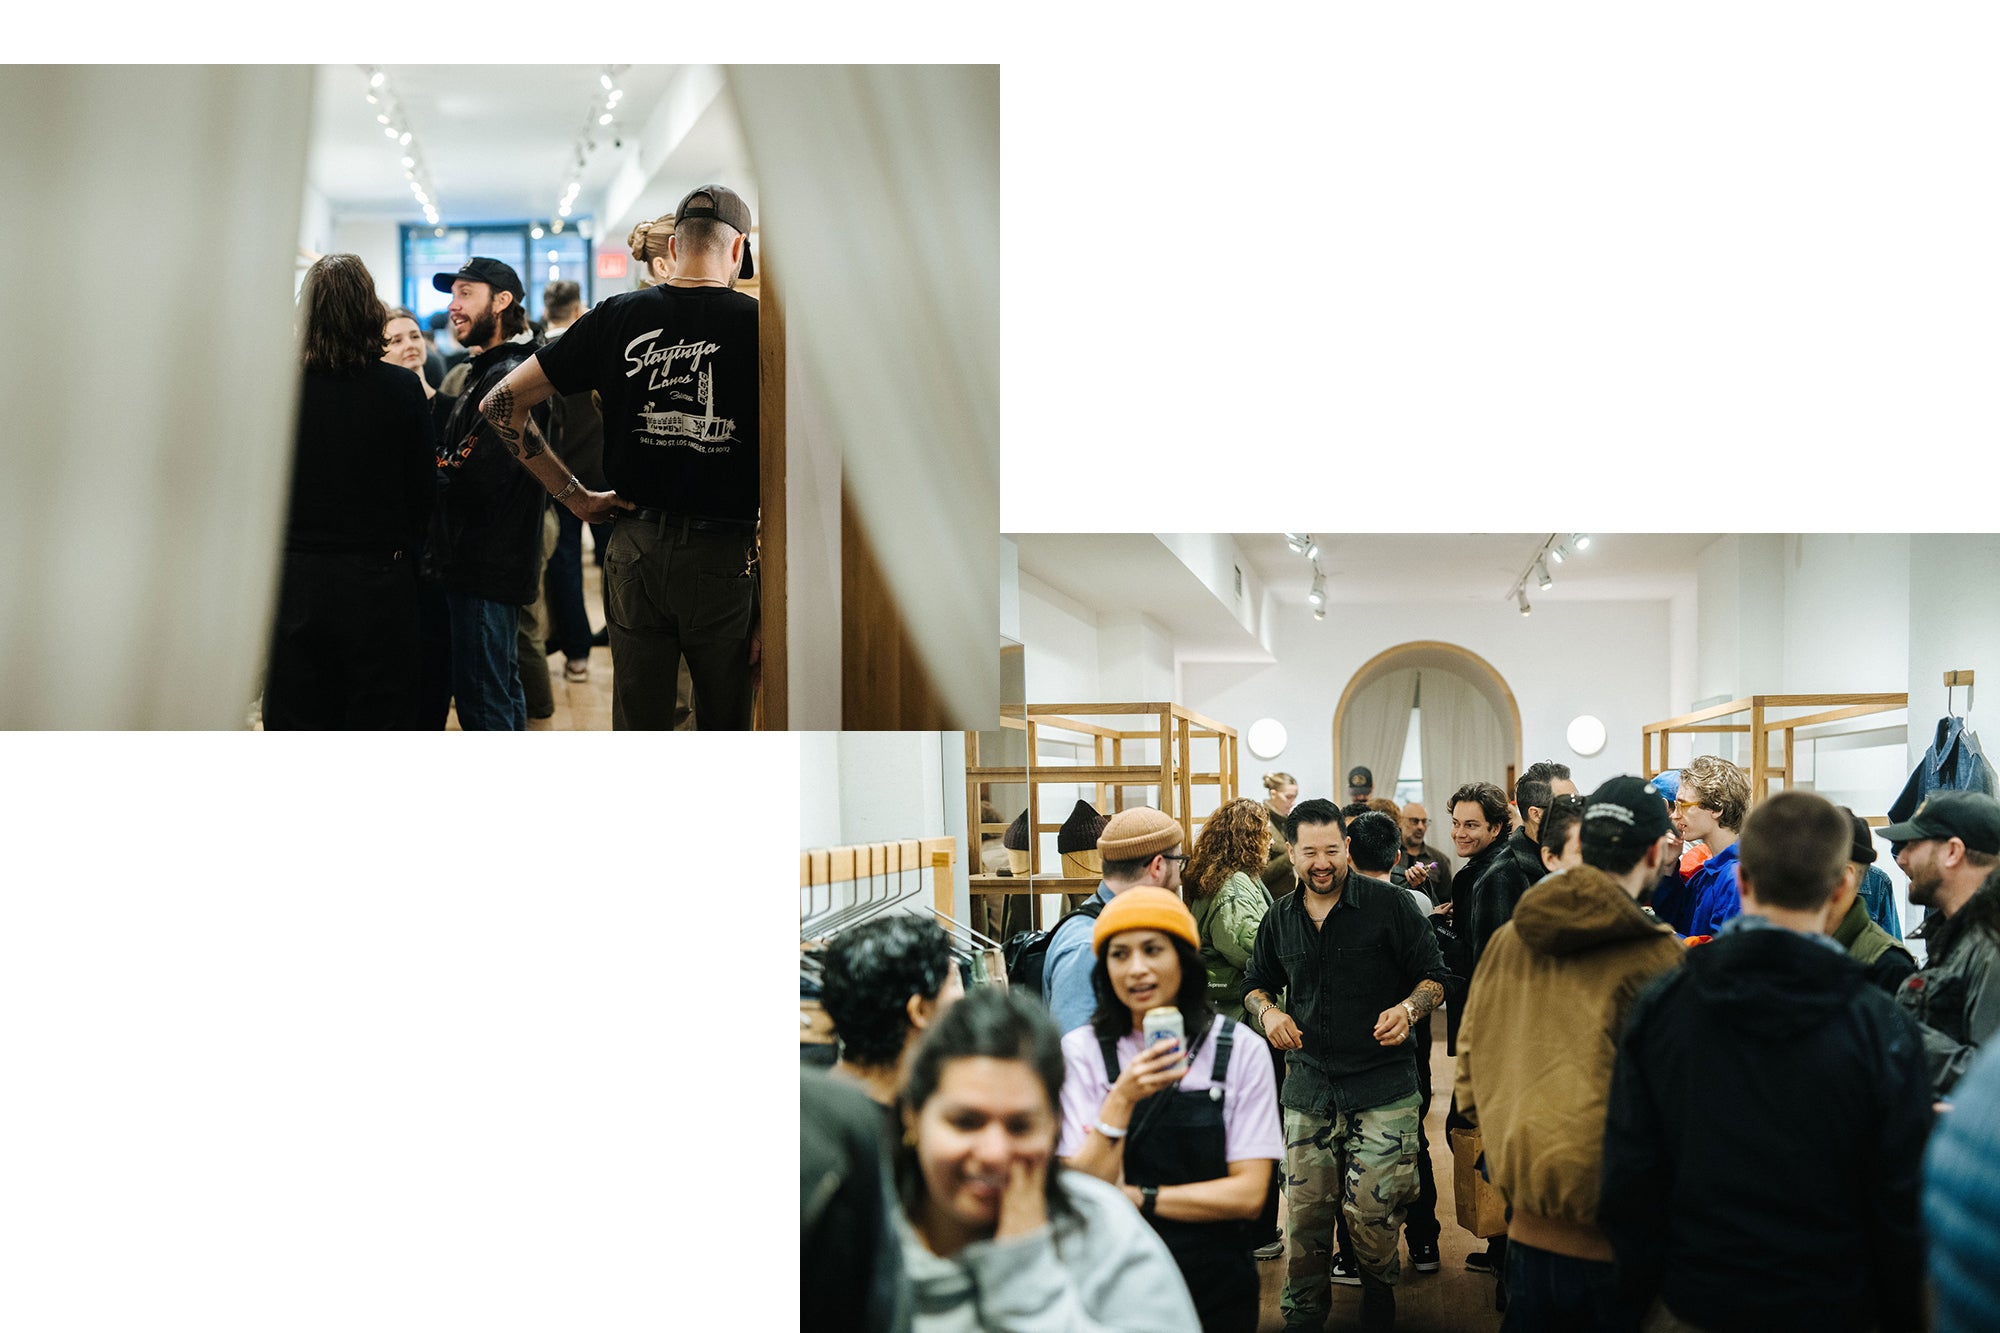 A diptych of people hanging out at the 3sixteen store with friends.